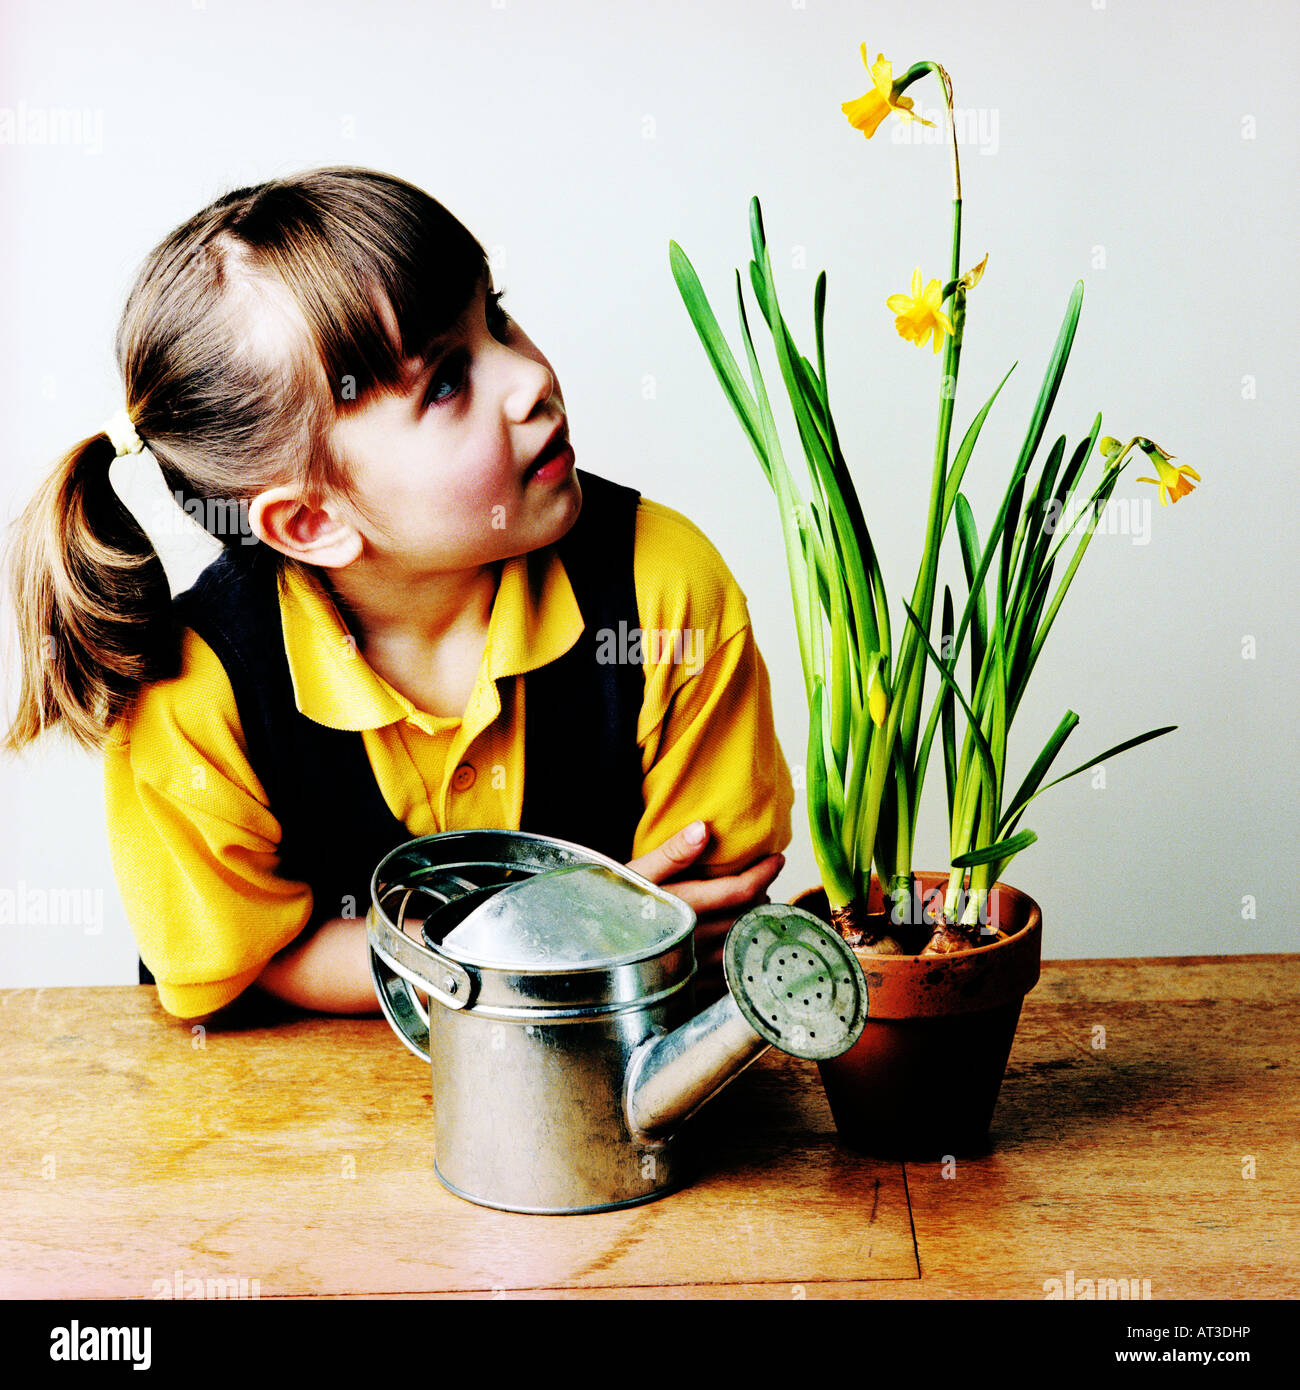 A girl looking at a flower Stock Photo